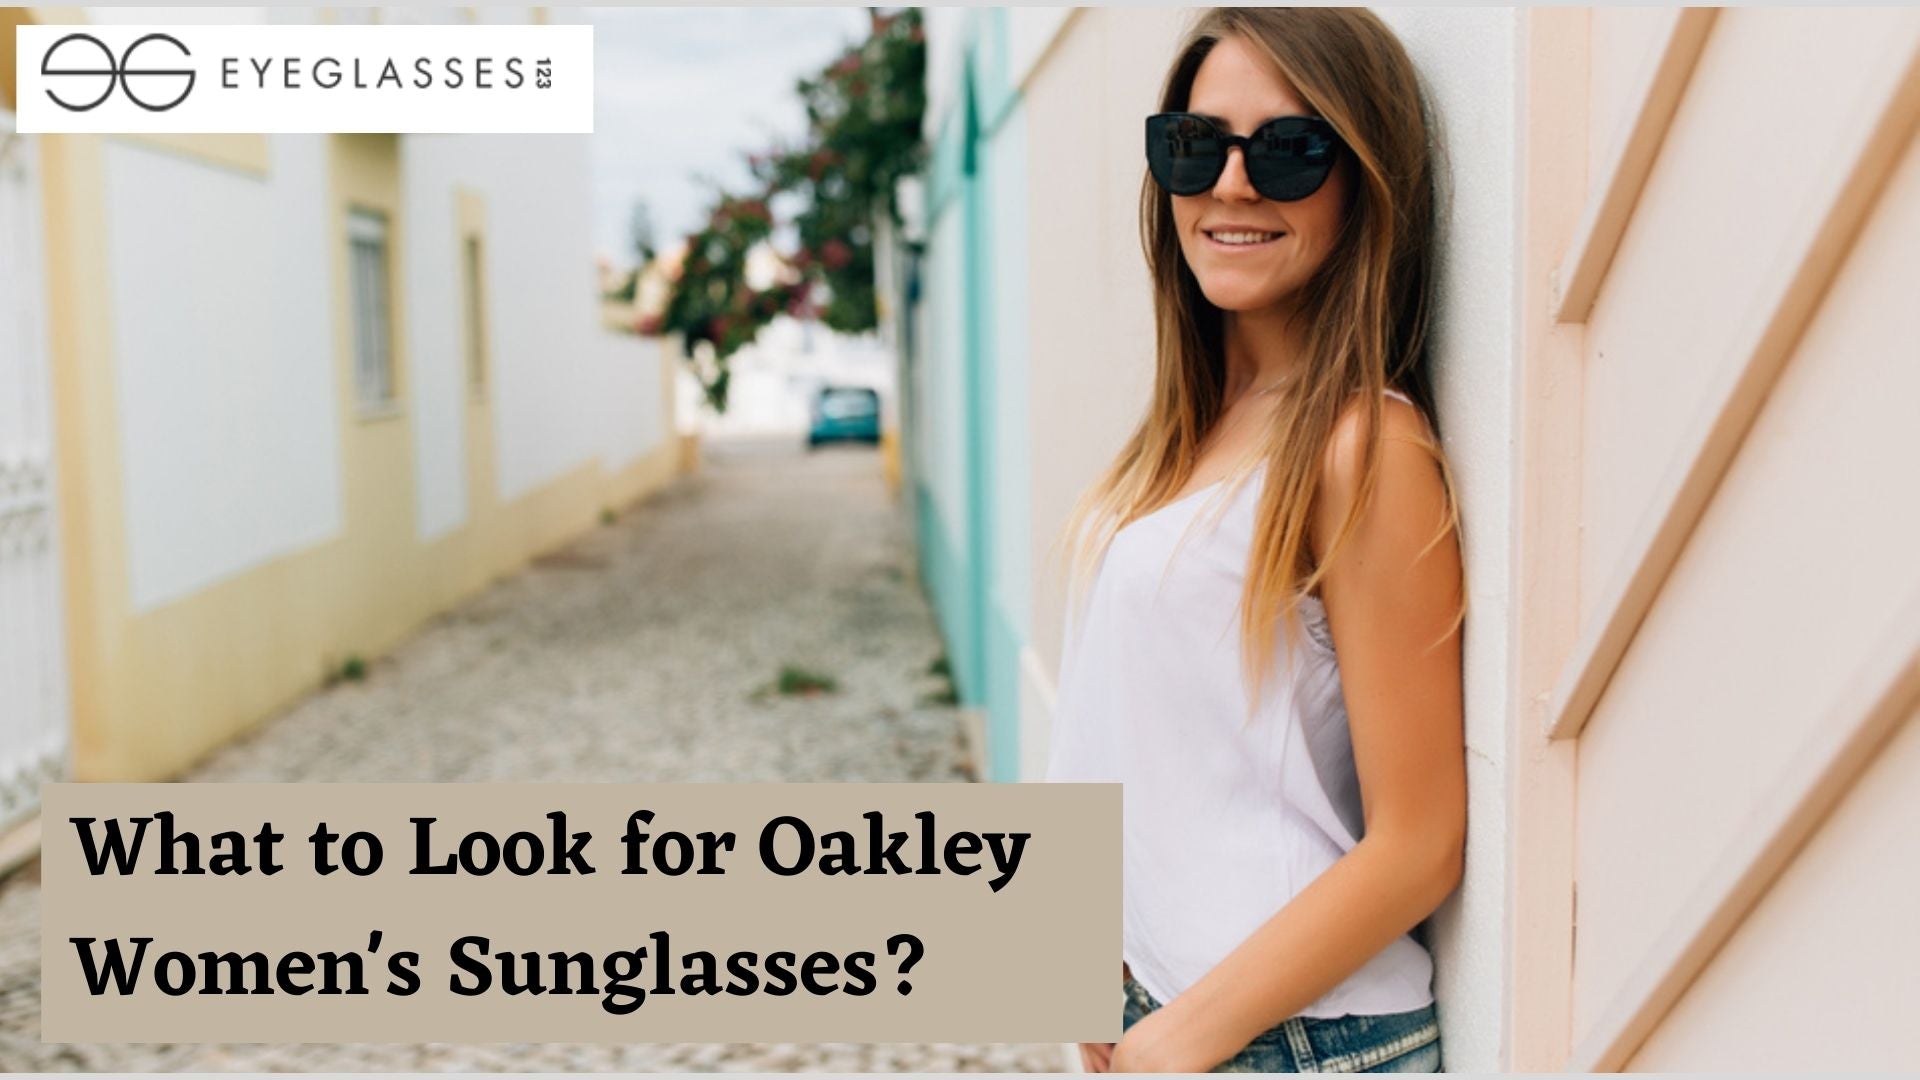 What to Look for Oakley Women's Sunglasses